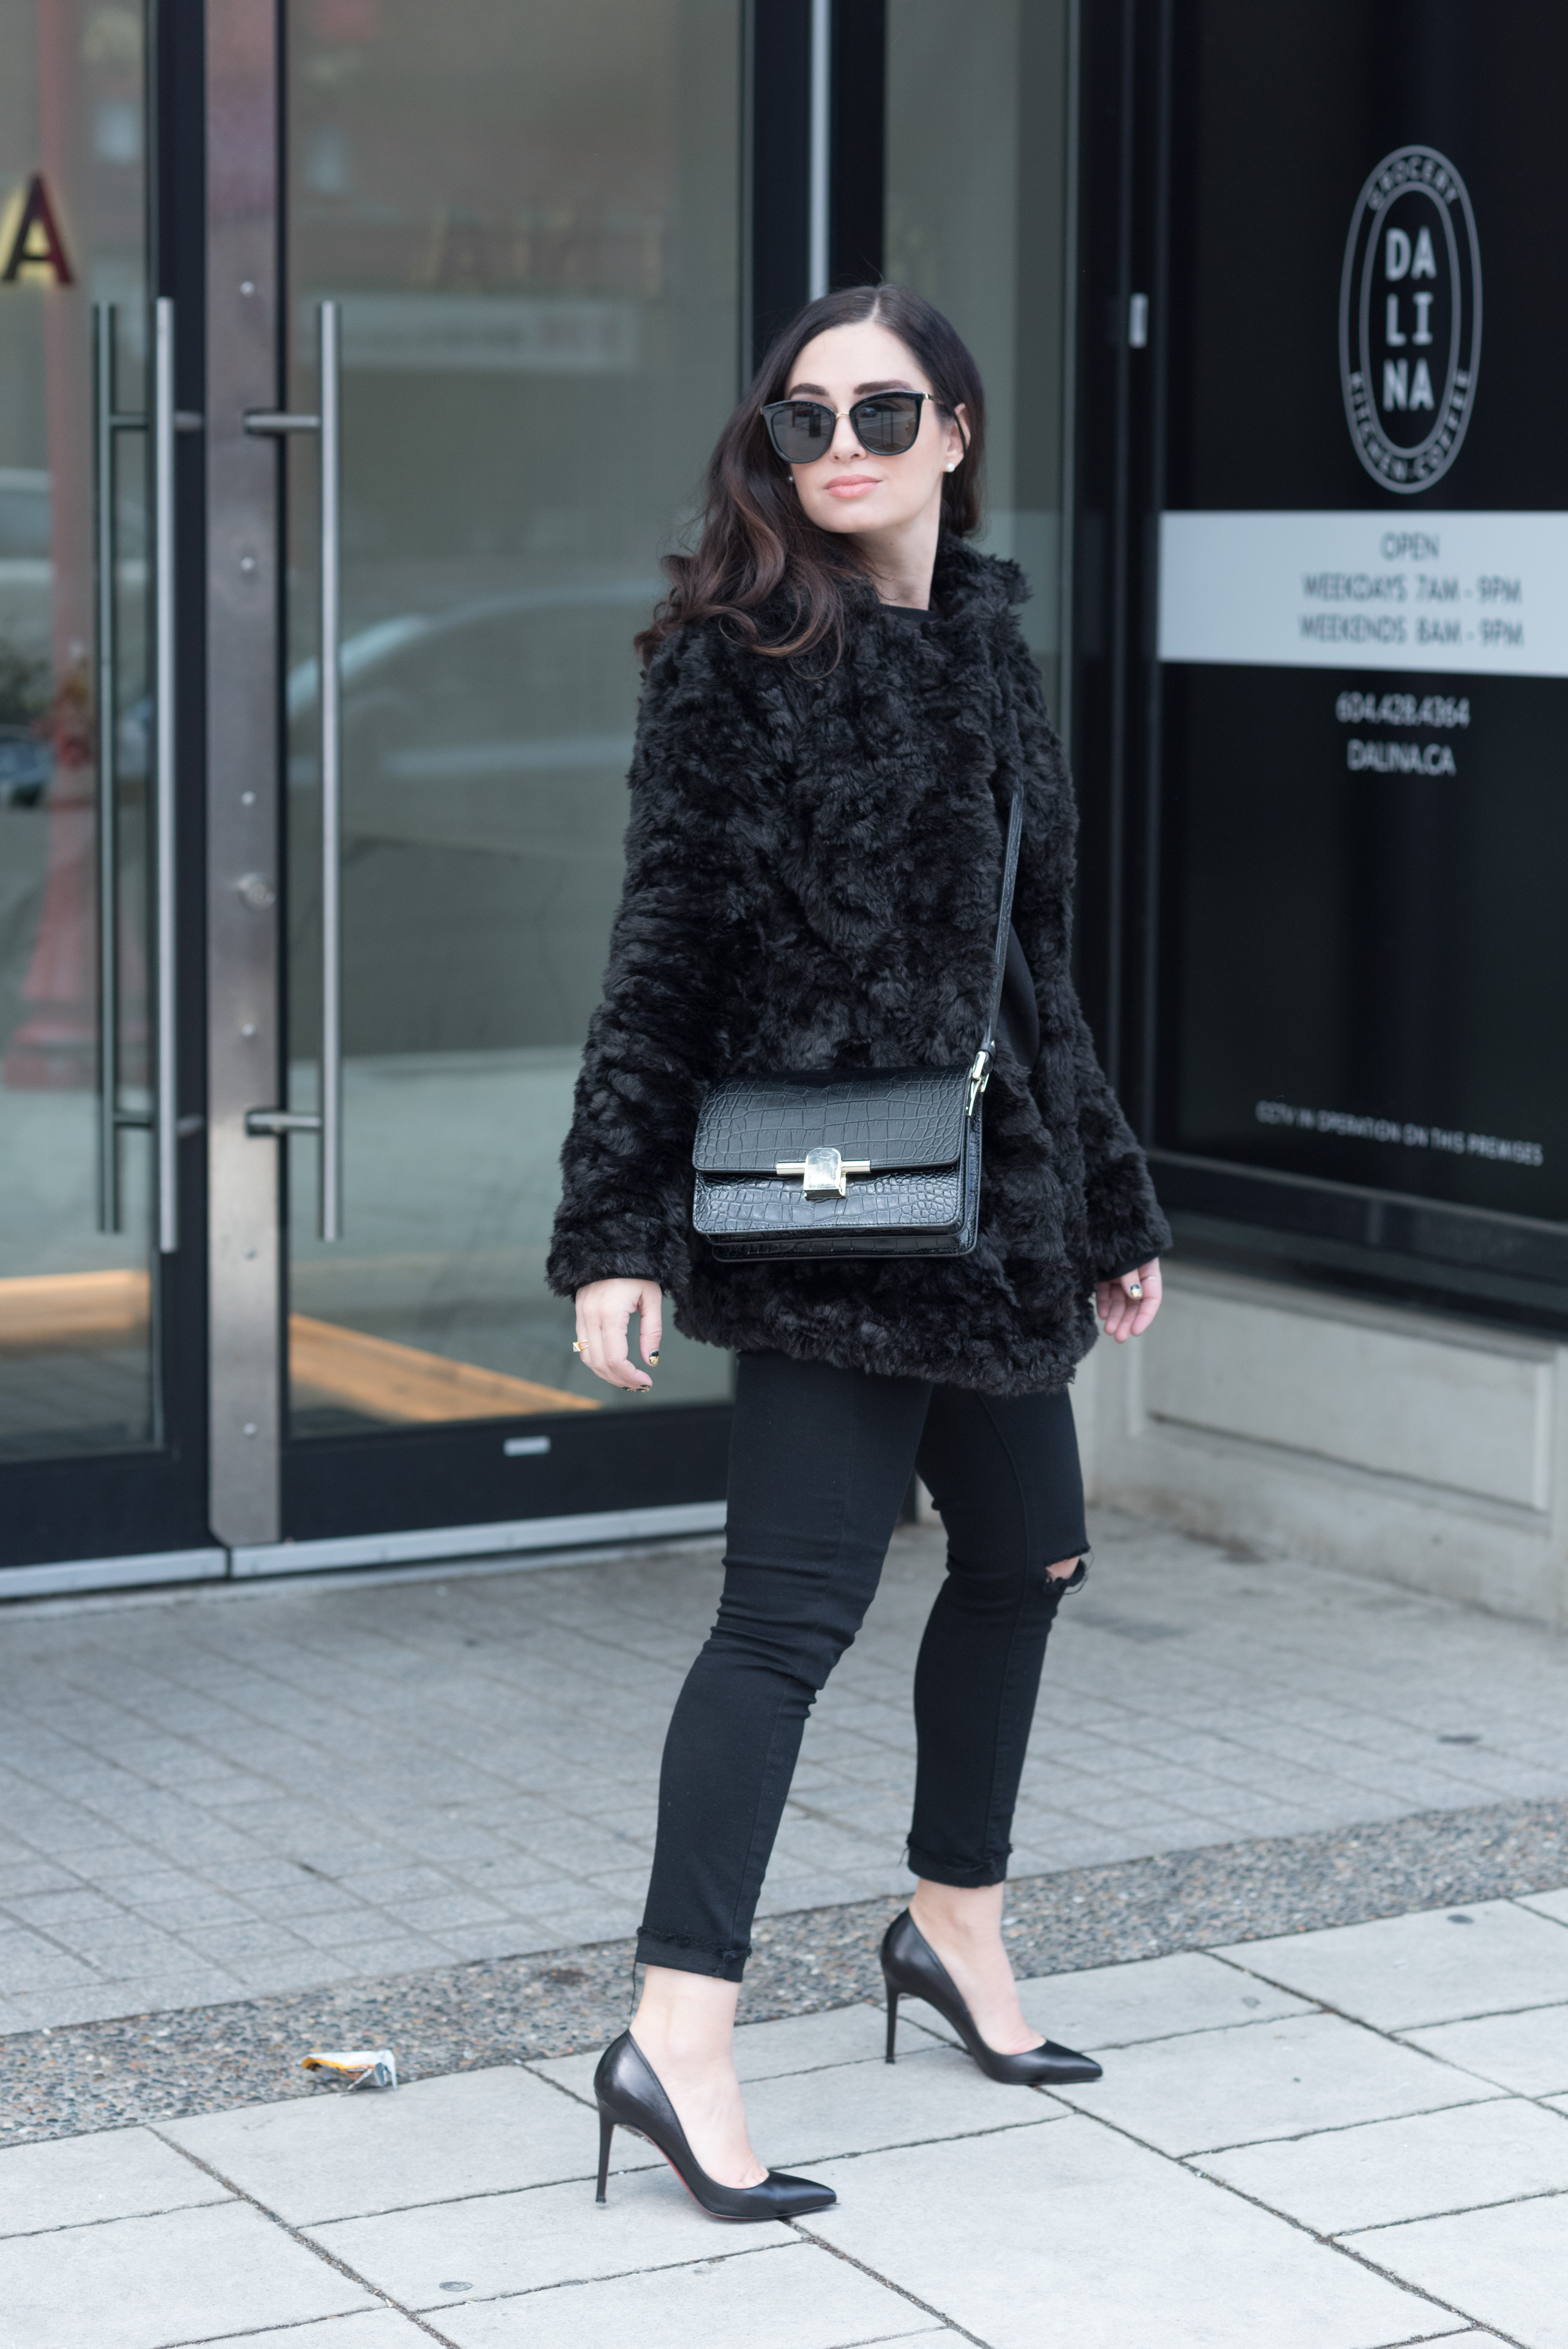 Fashion blogger Cee Fardoe of Coco & Vera stands outside Dalina in Vancouver wearing a black fur coat from Le Chateau and Le Specs sunglasses